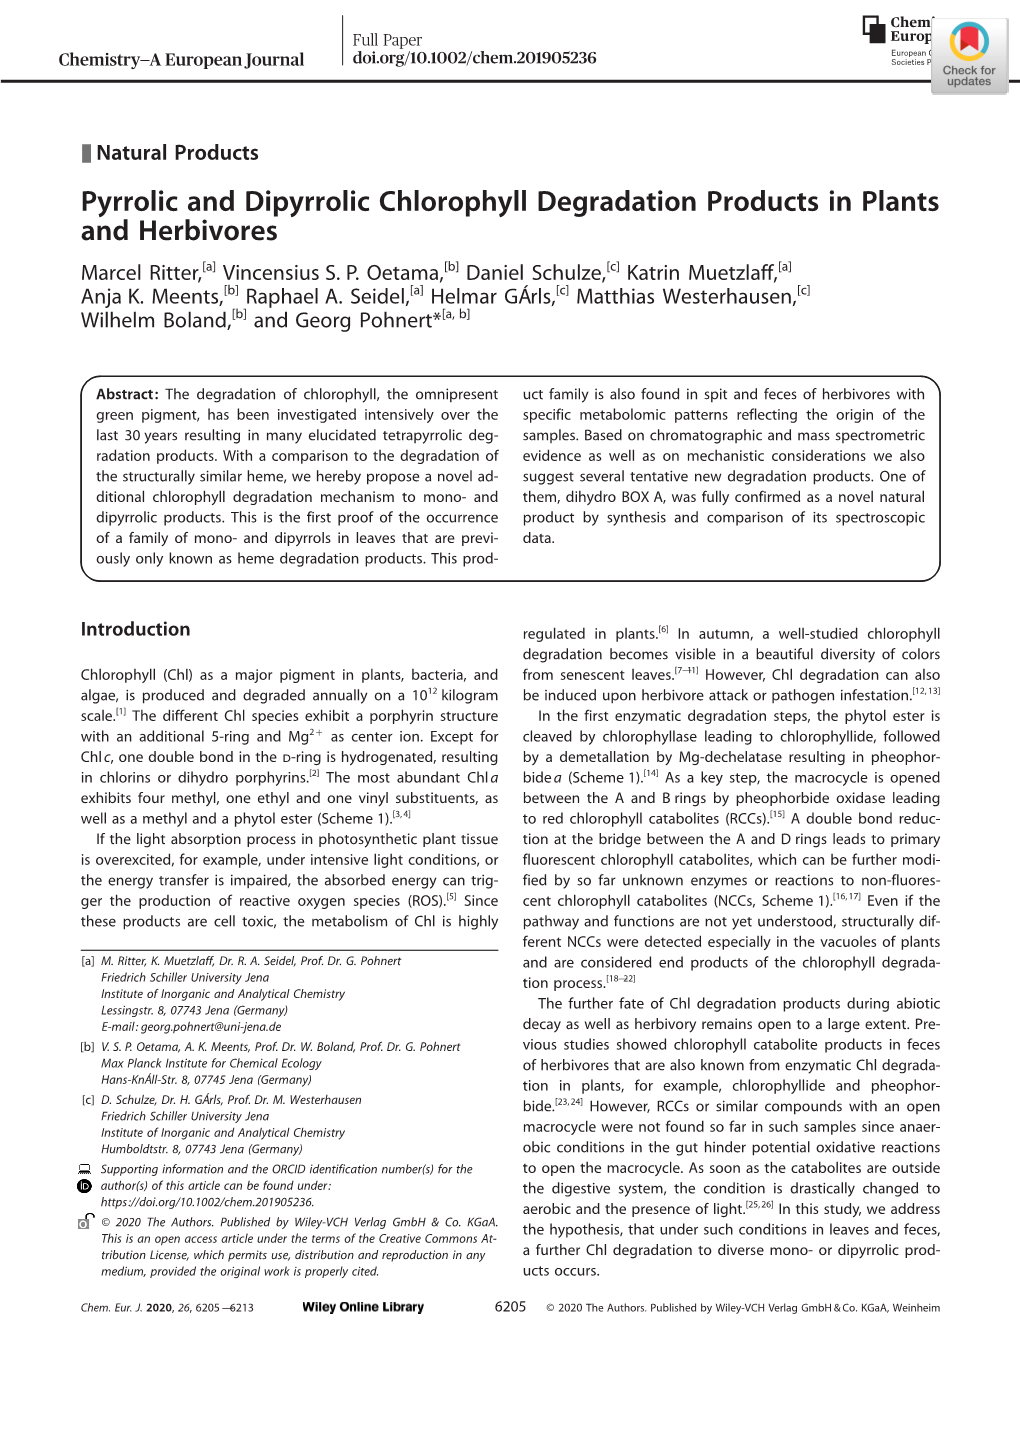 Pyrrolic and Dipyrrolic Chlorophyll Degradation Products in Plants And